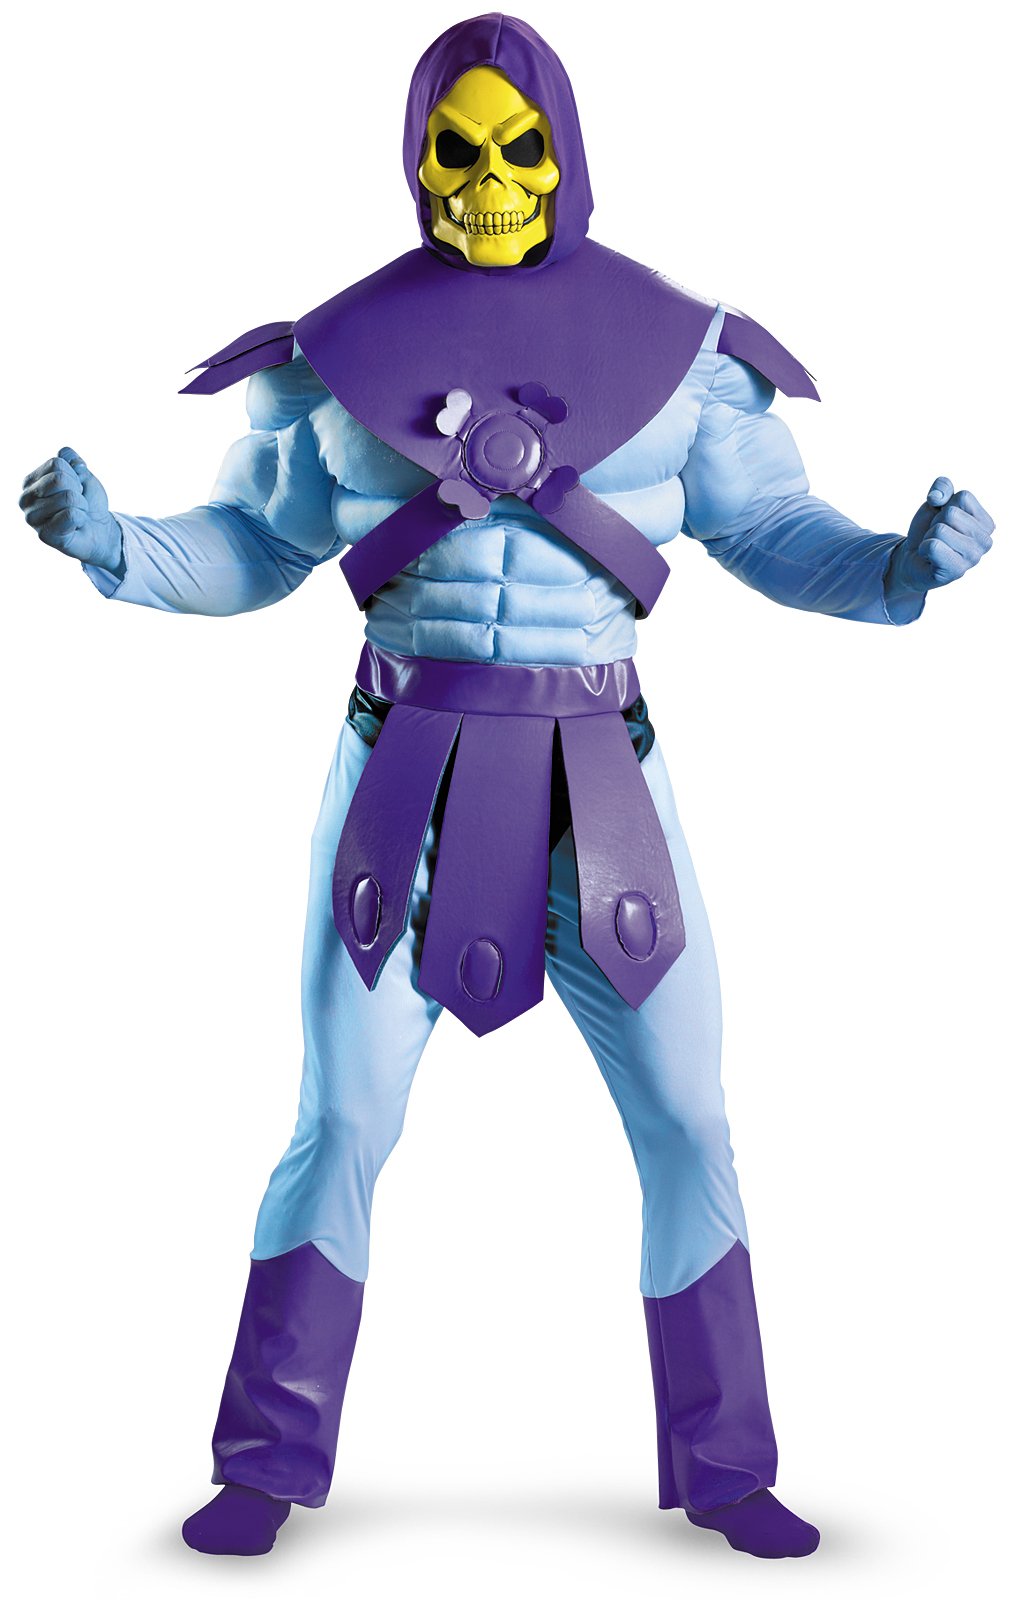 Masters Of The Universe - Skeletor Adult Costume